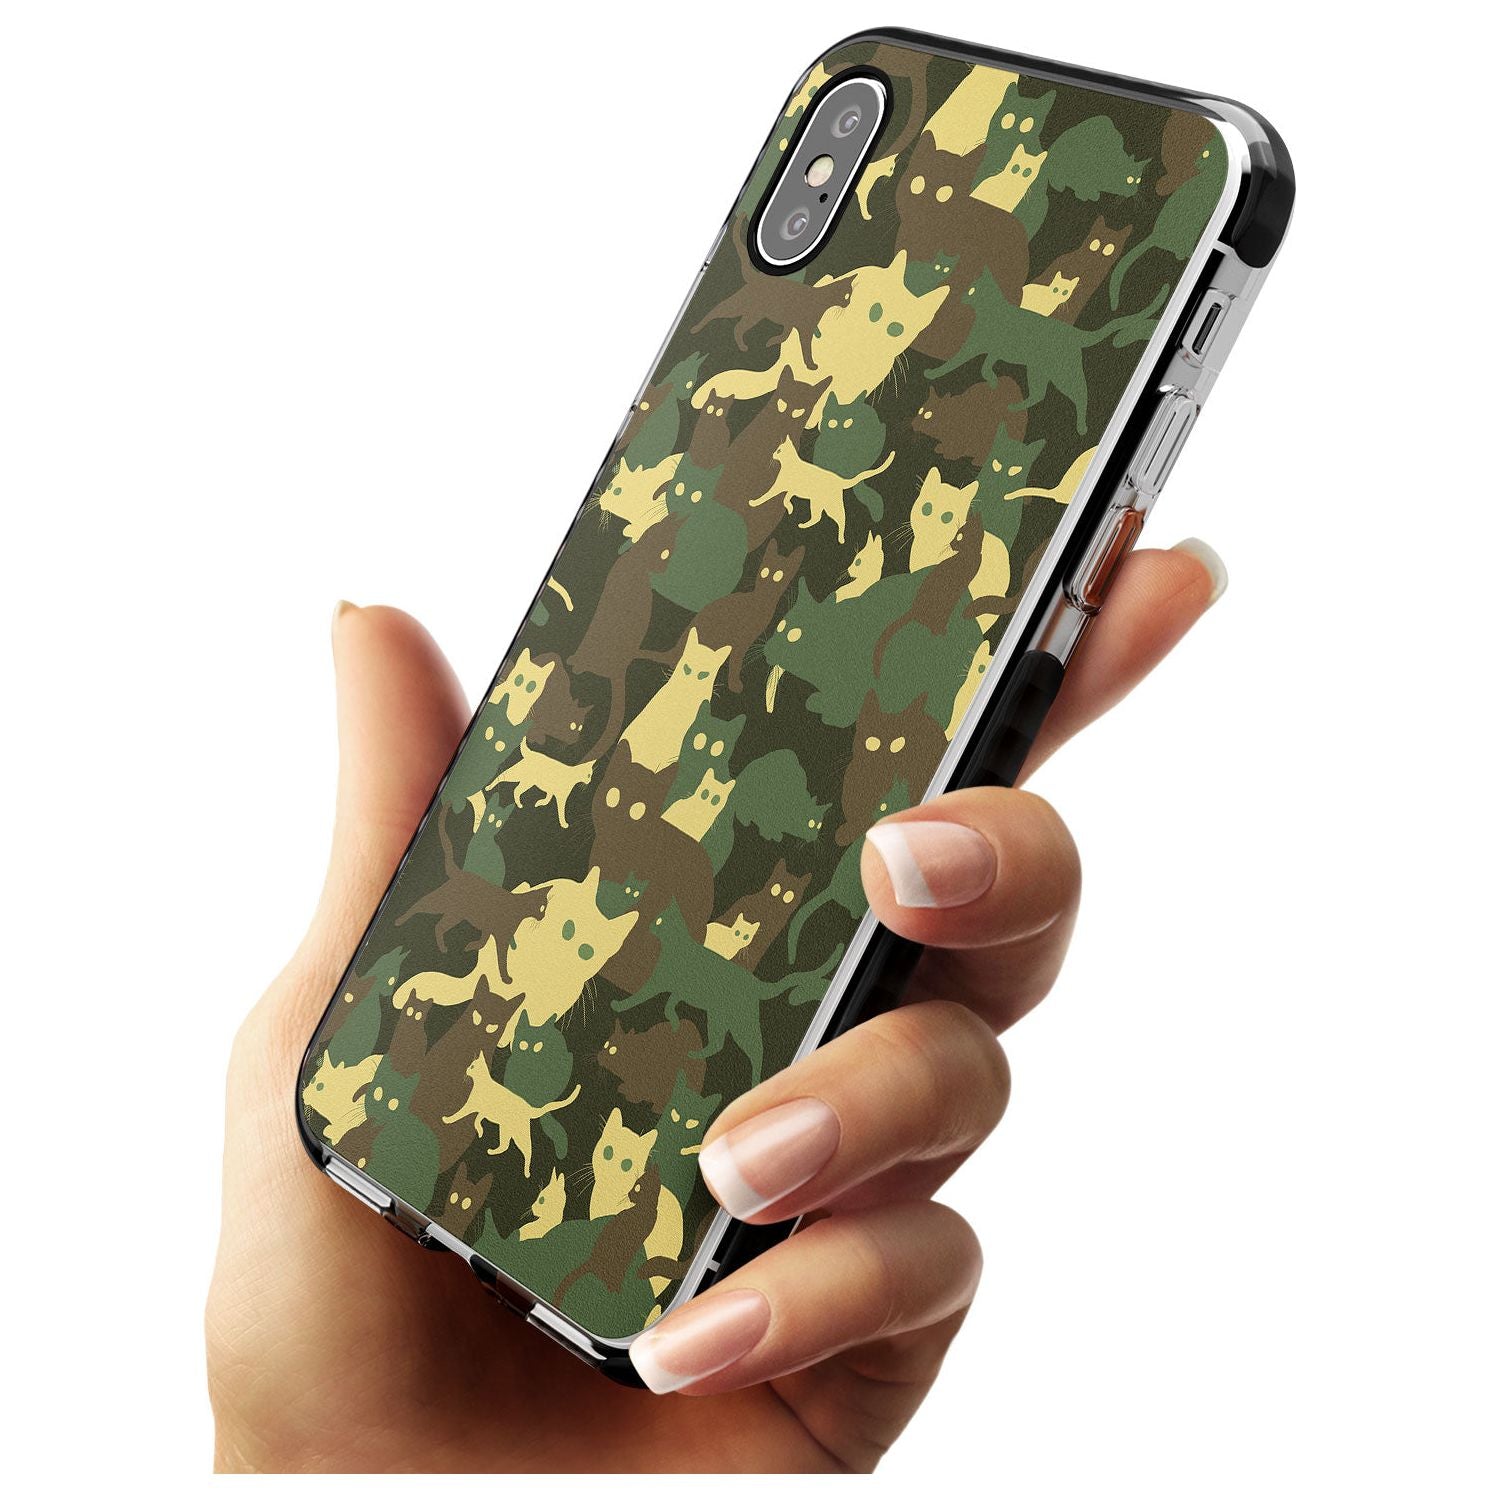 Forest Green Cat Camouflage Pattern Black Impact Phone Case for iPhone X XS Max XR